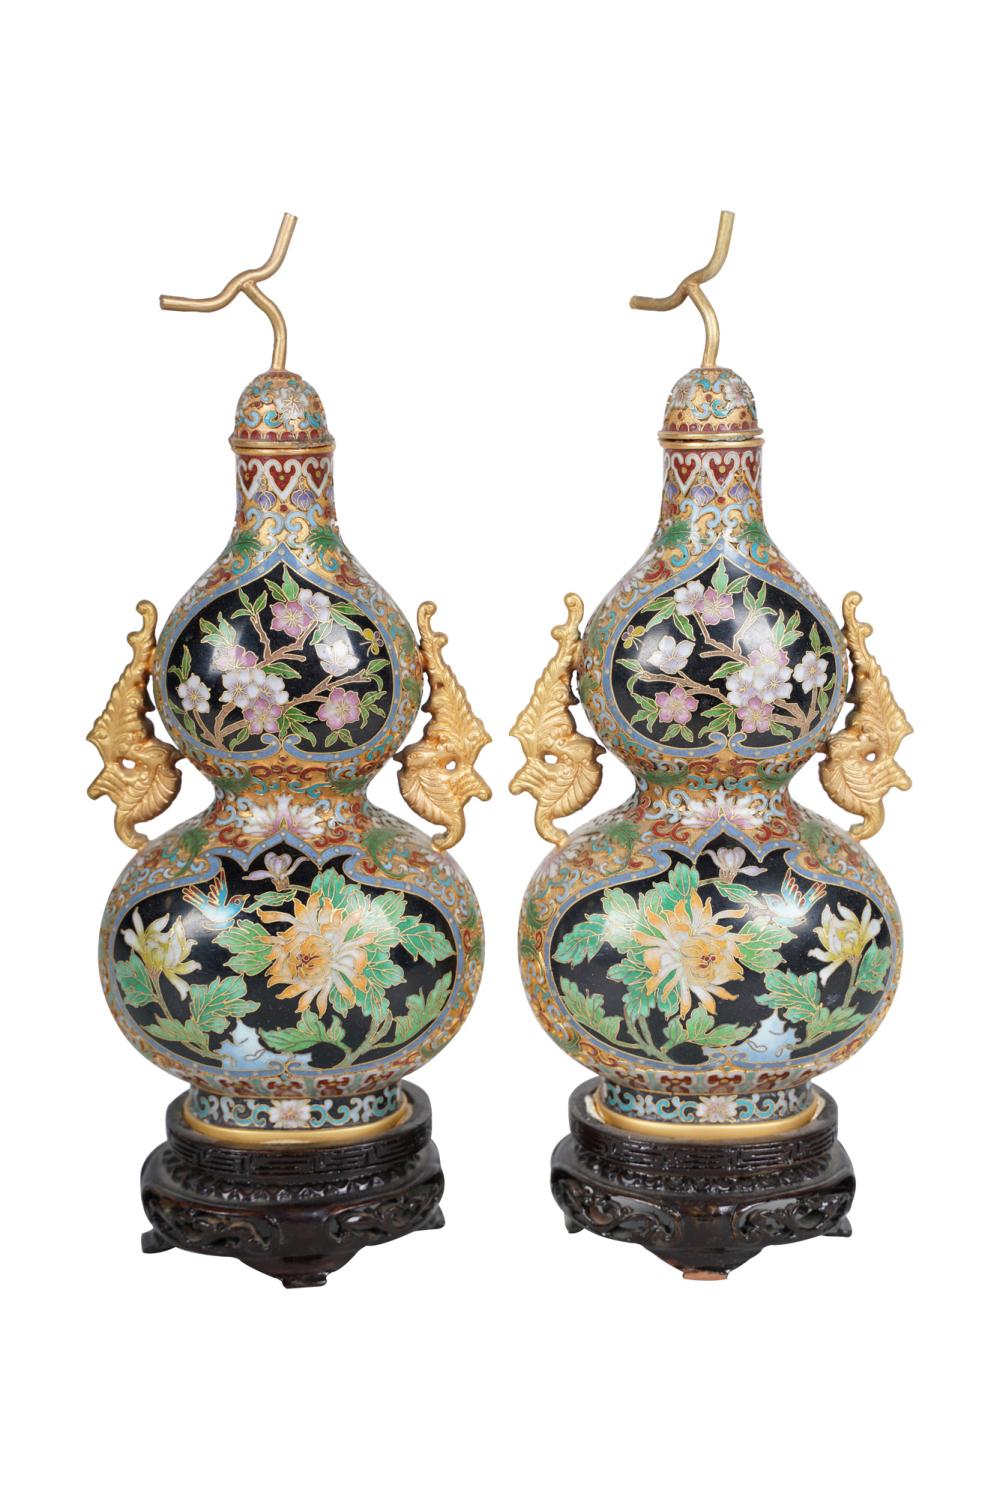 PAIR OF CLOISONNE COVERED GORD 33609d